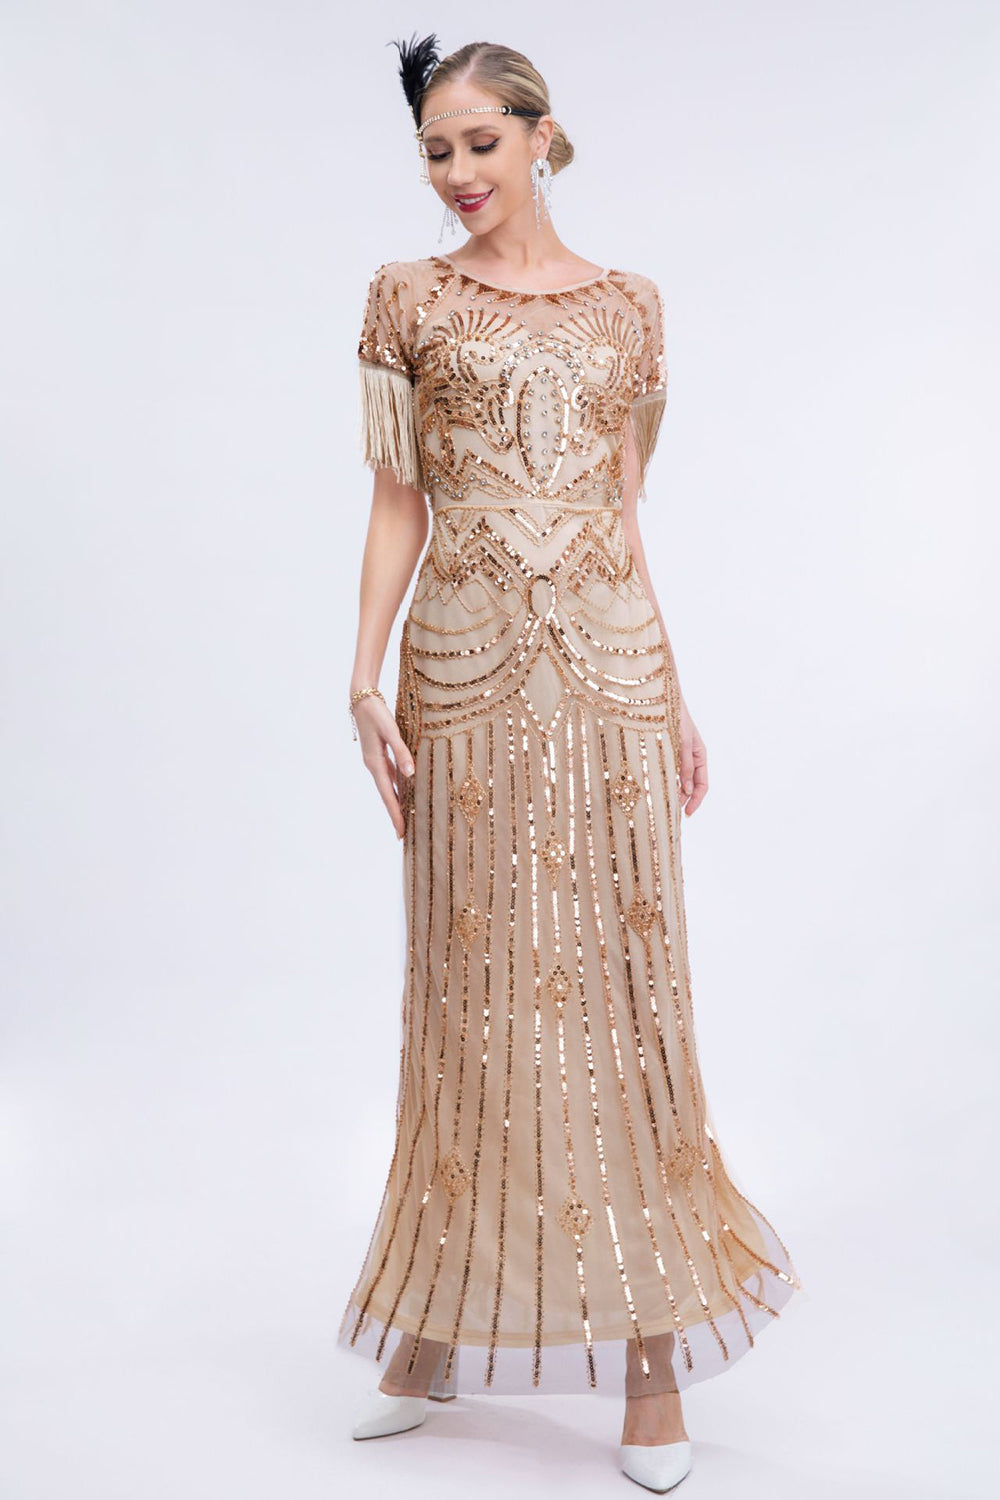 Golden Sheath Long 1920s Dress with Fringes